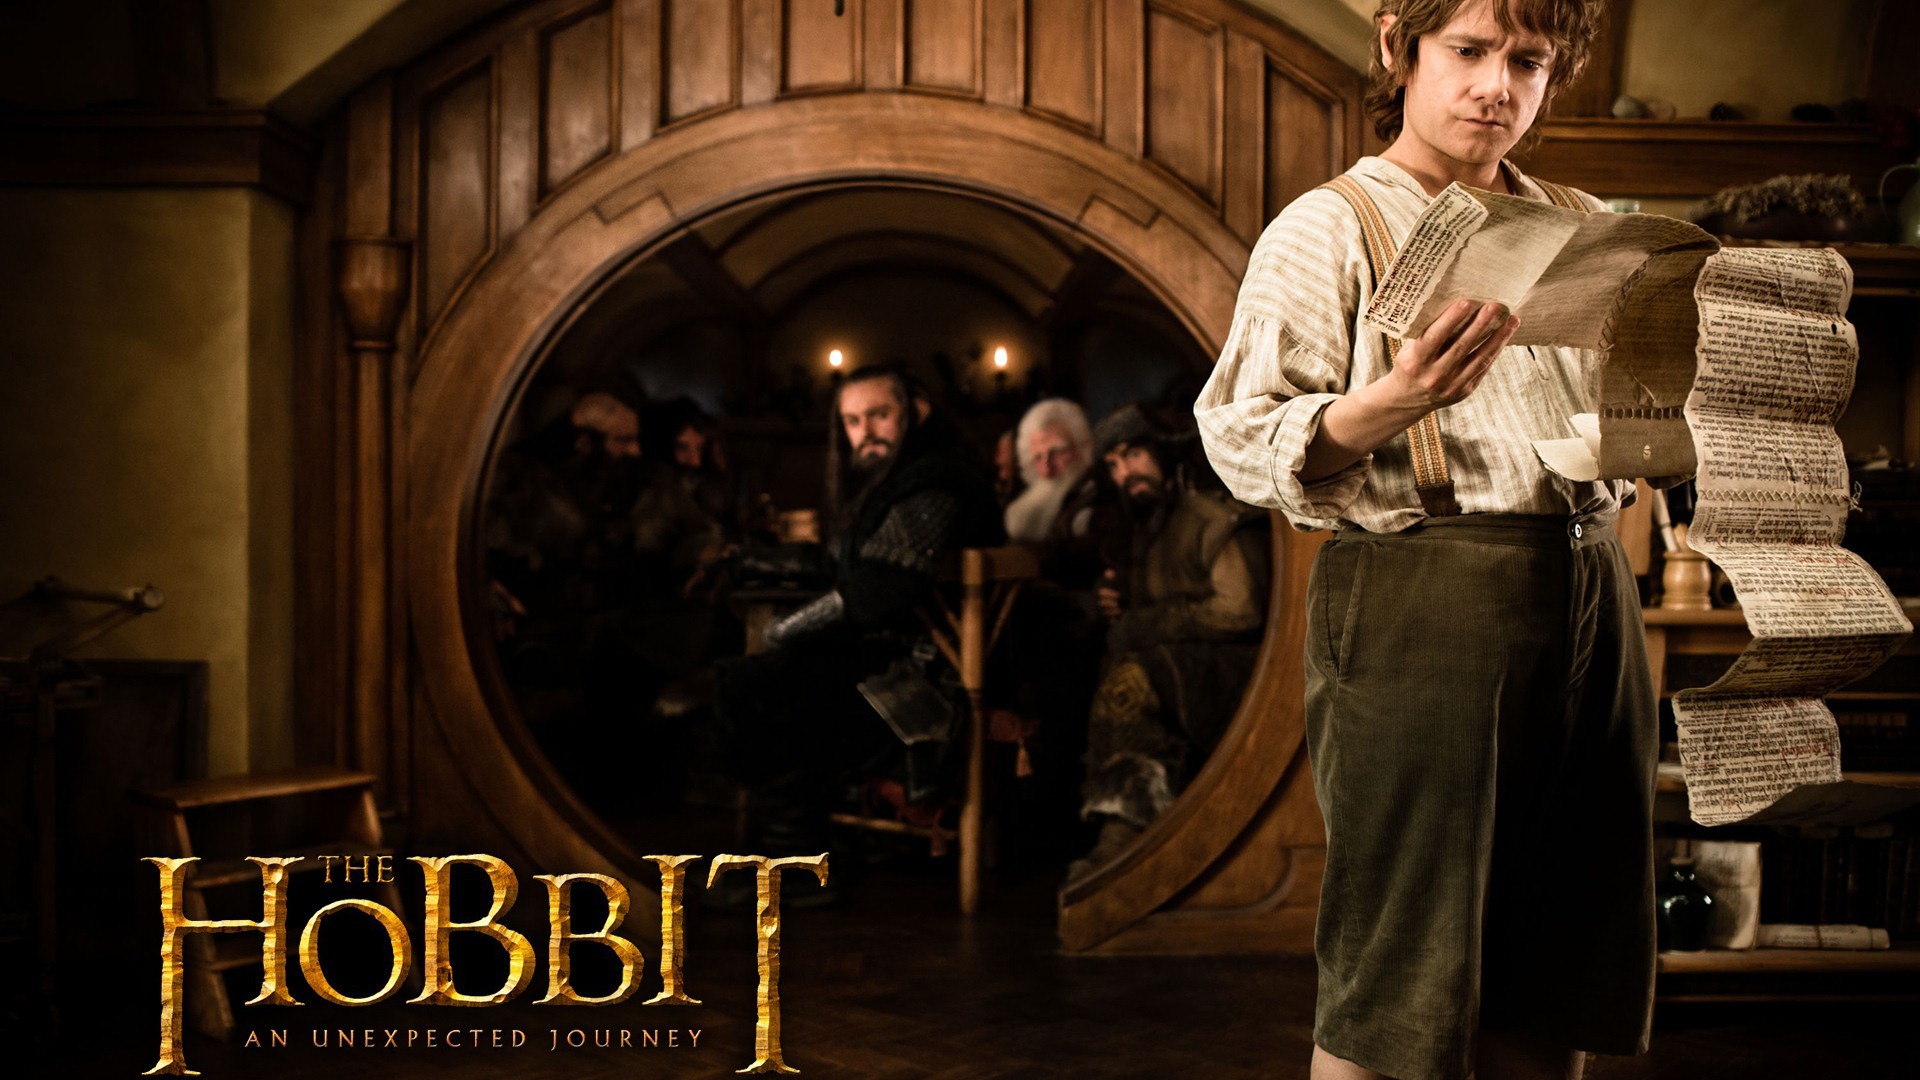 The Hobbit: An Unexpected Journey HD wallpapers #11 - 1920x1080